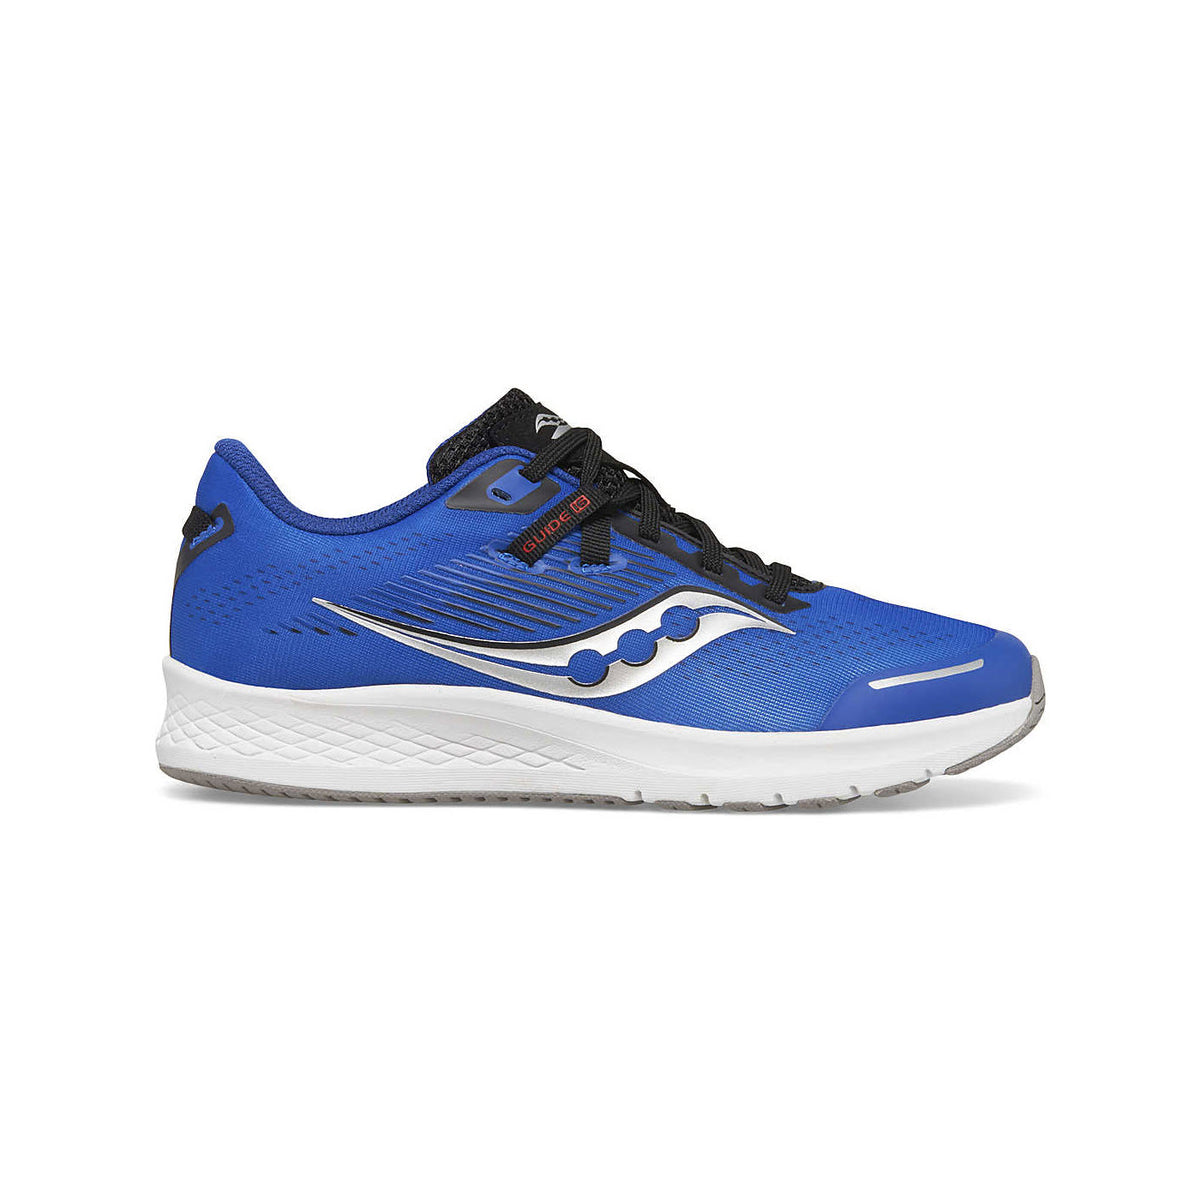 Replace with:
&quot;Saucony Guide 16 blue/black running shoe with white sole and black laces, featuring the Saucony logo on the side and a contoured footbed.